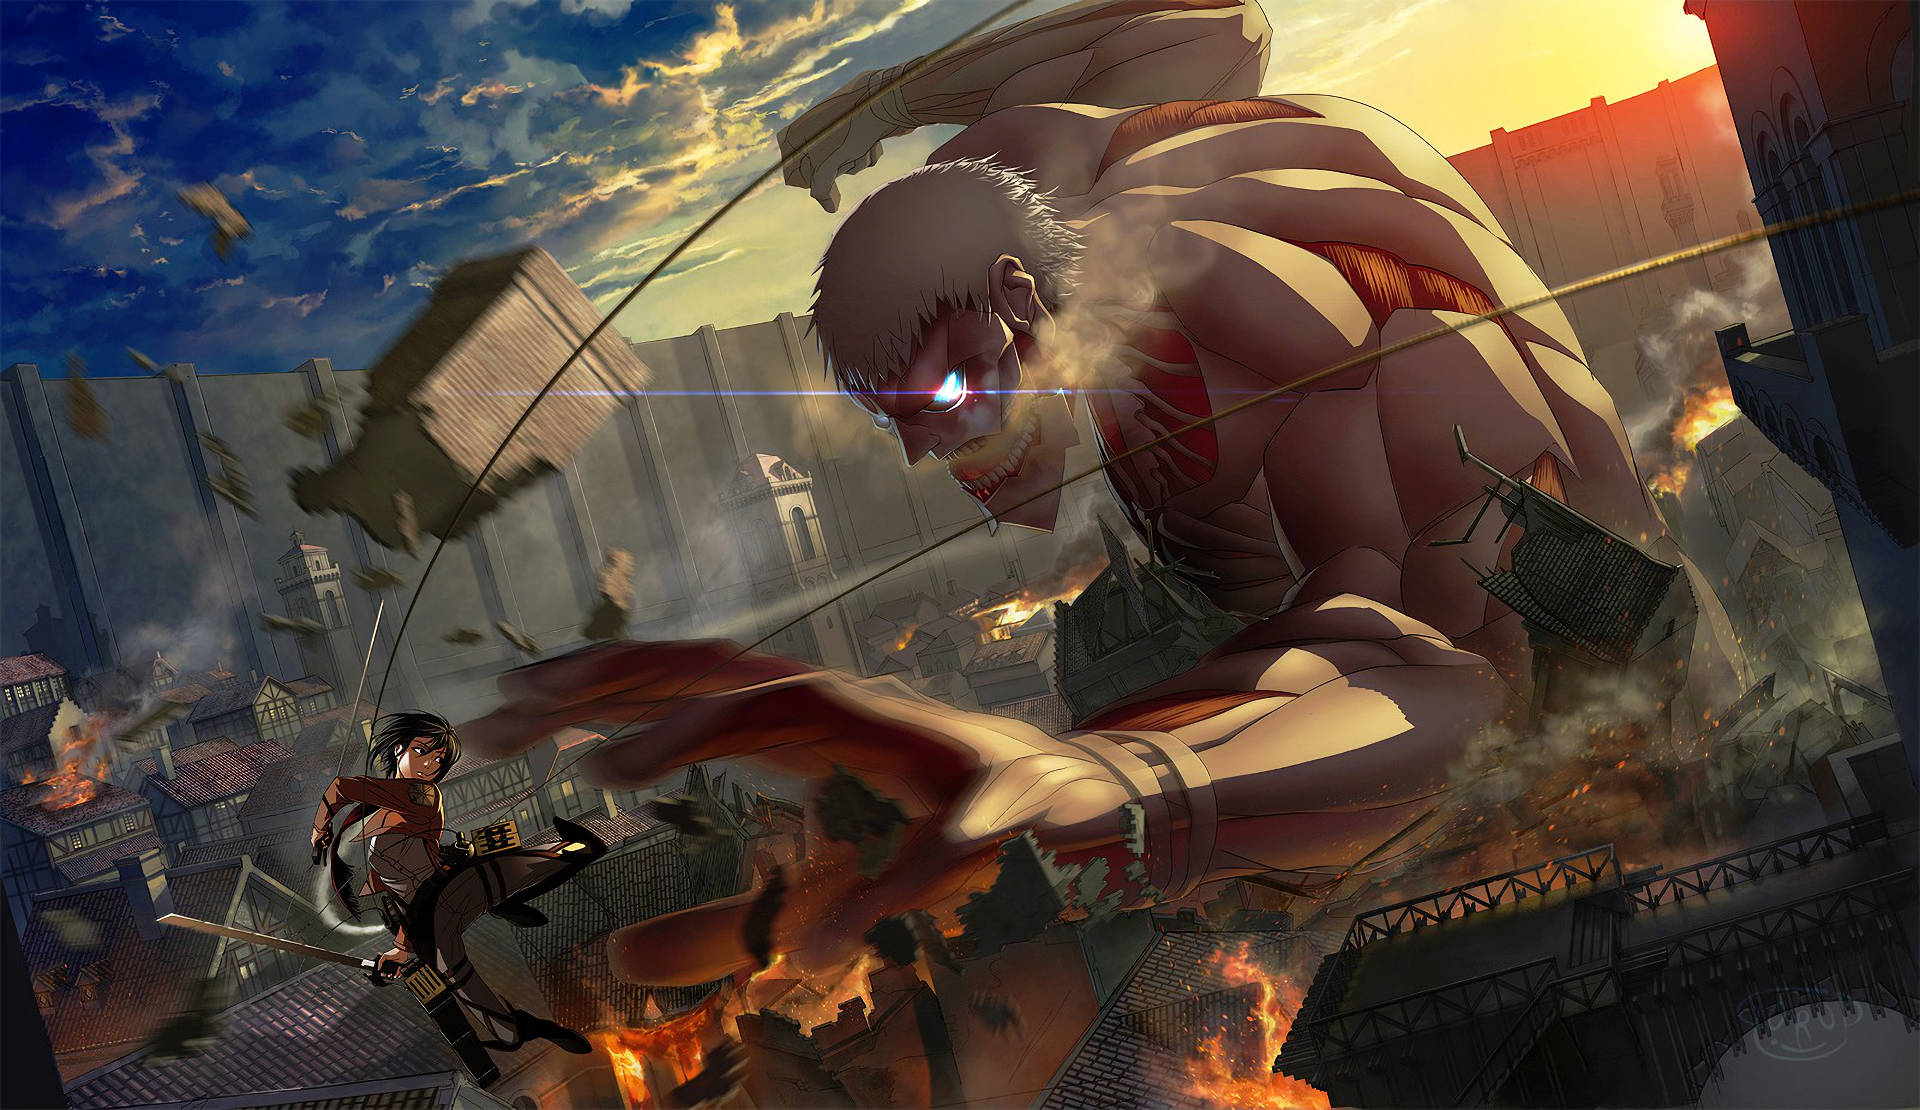 Armored titan facing against Mikasa in a fight to the death Wallpaper